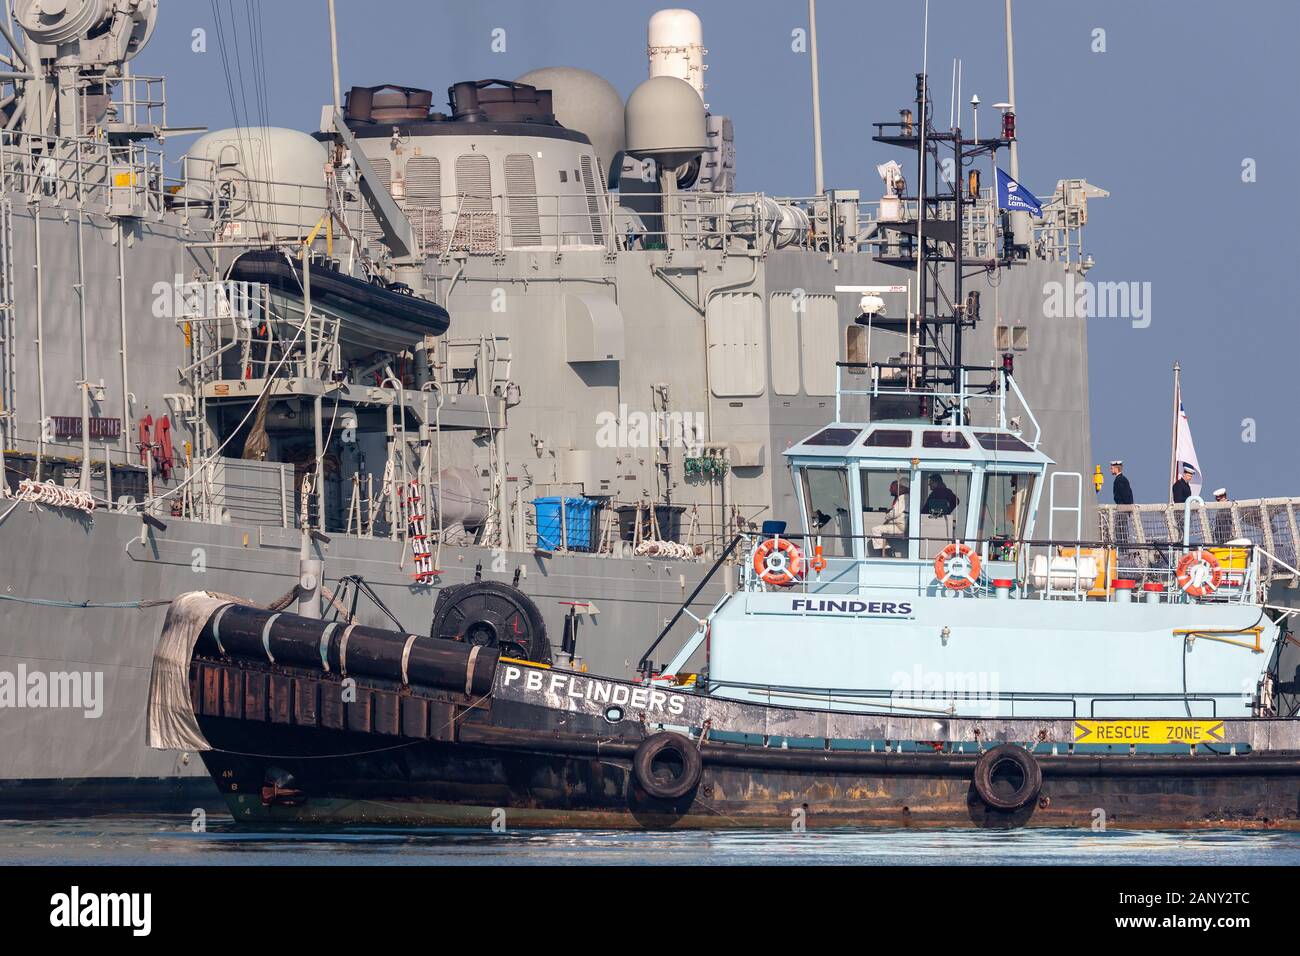 Tug boat PB Flinders assigning the HMAS Melbourne (FFG 05) guided-missile frigate of the Royal Australian Navy dock at Station Pier in Melbourne. Stock Photo